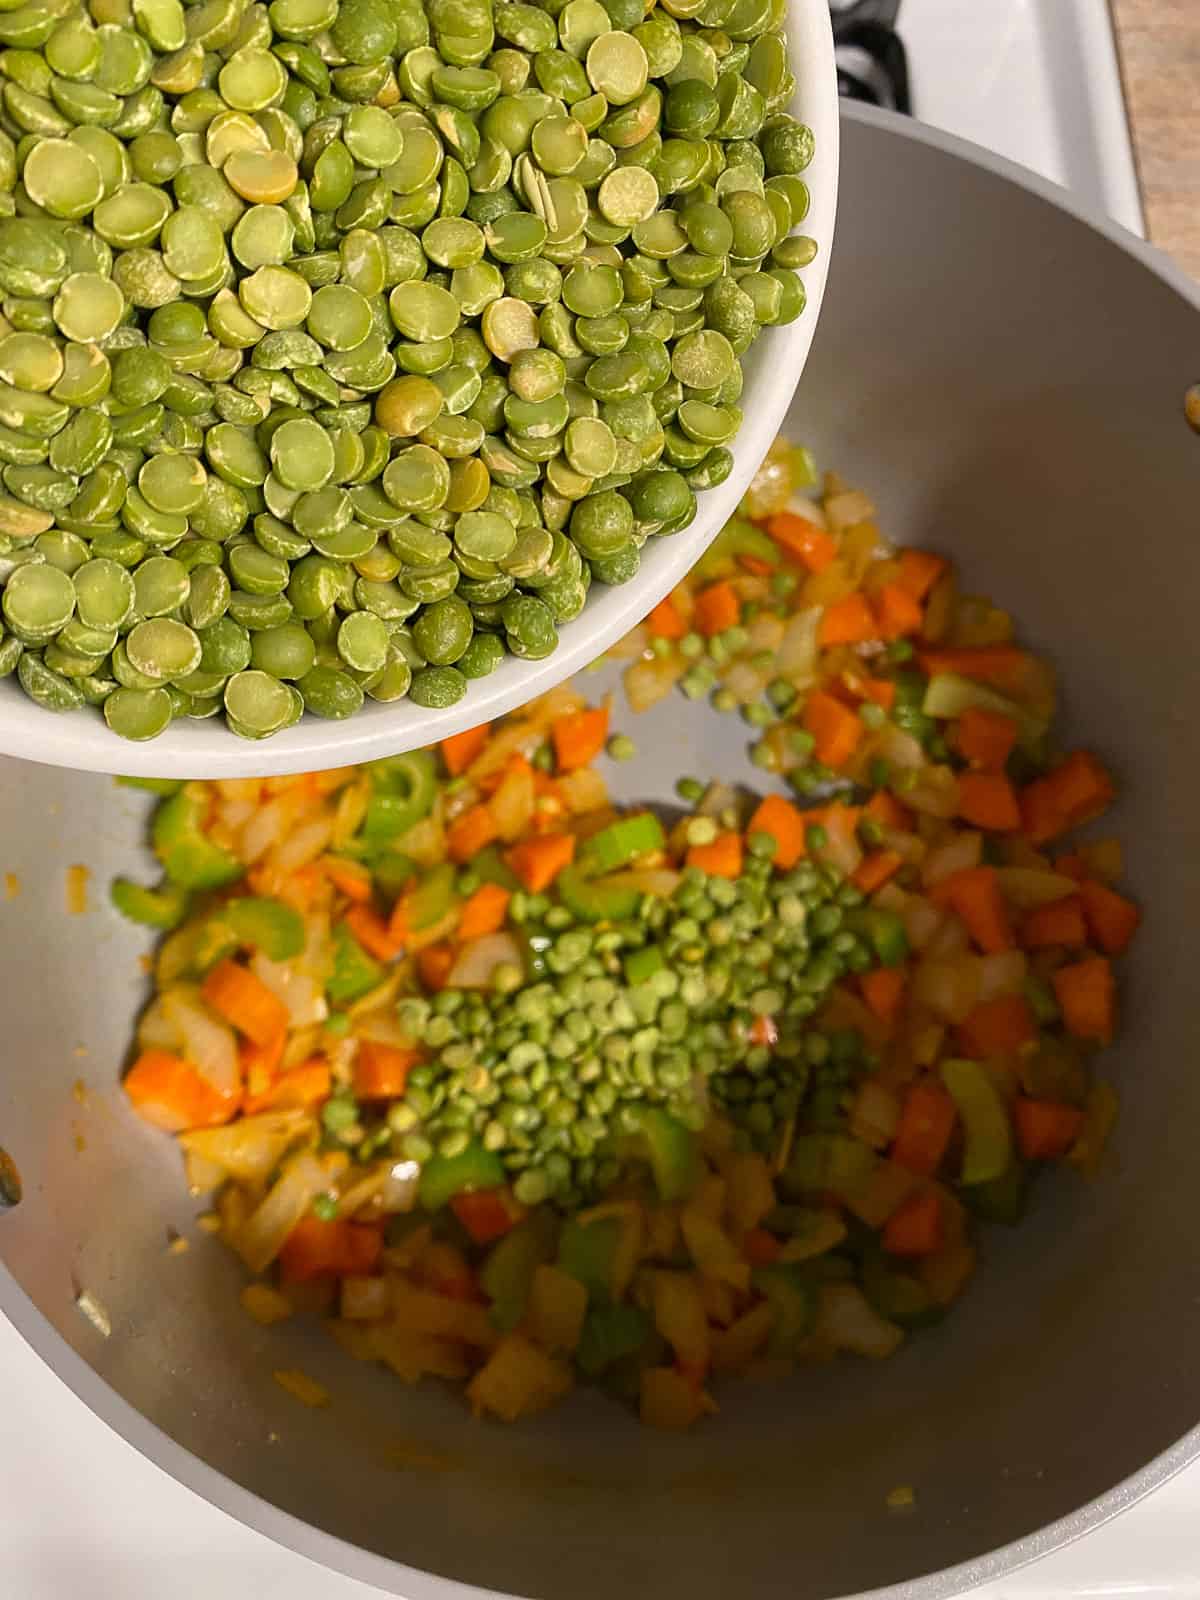 cups of split peas being added to bowl of veggies